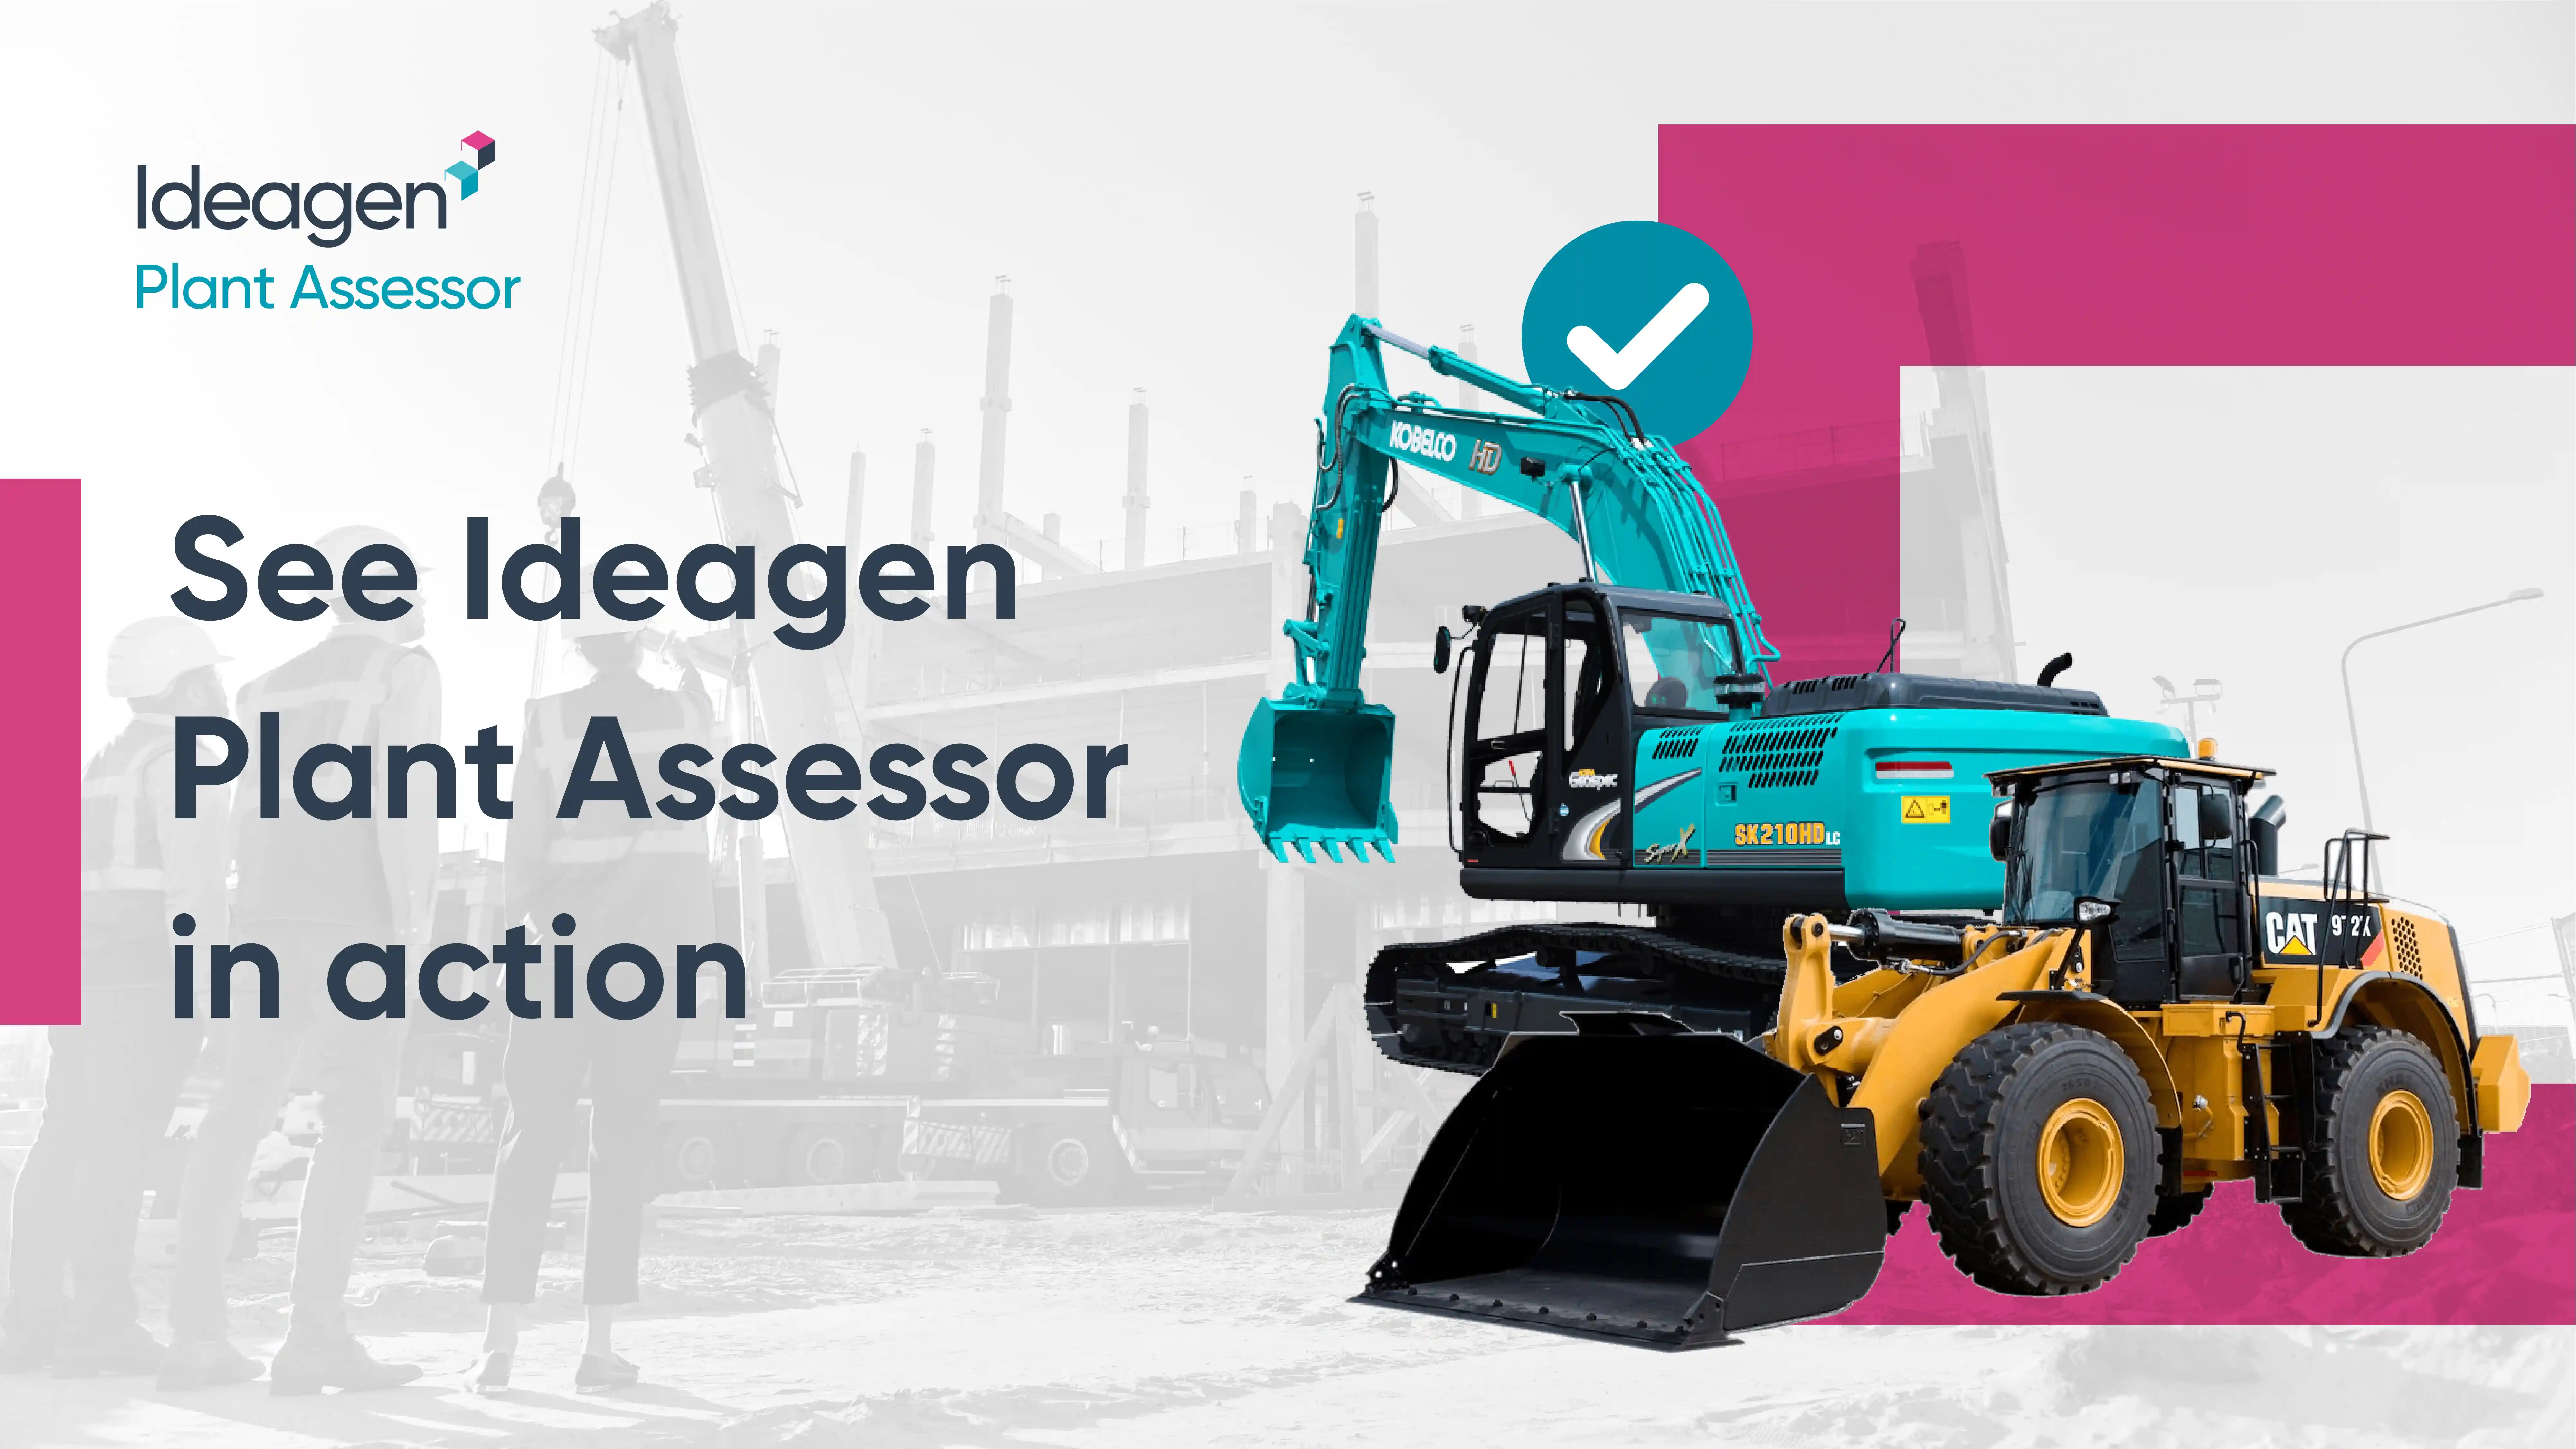 Watch an overview of features and benefits of using Ideagen Plant Assessor